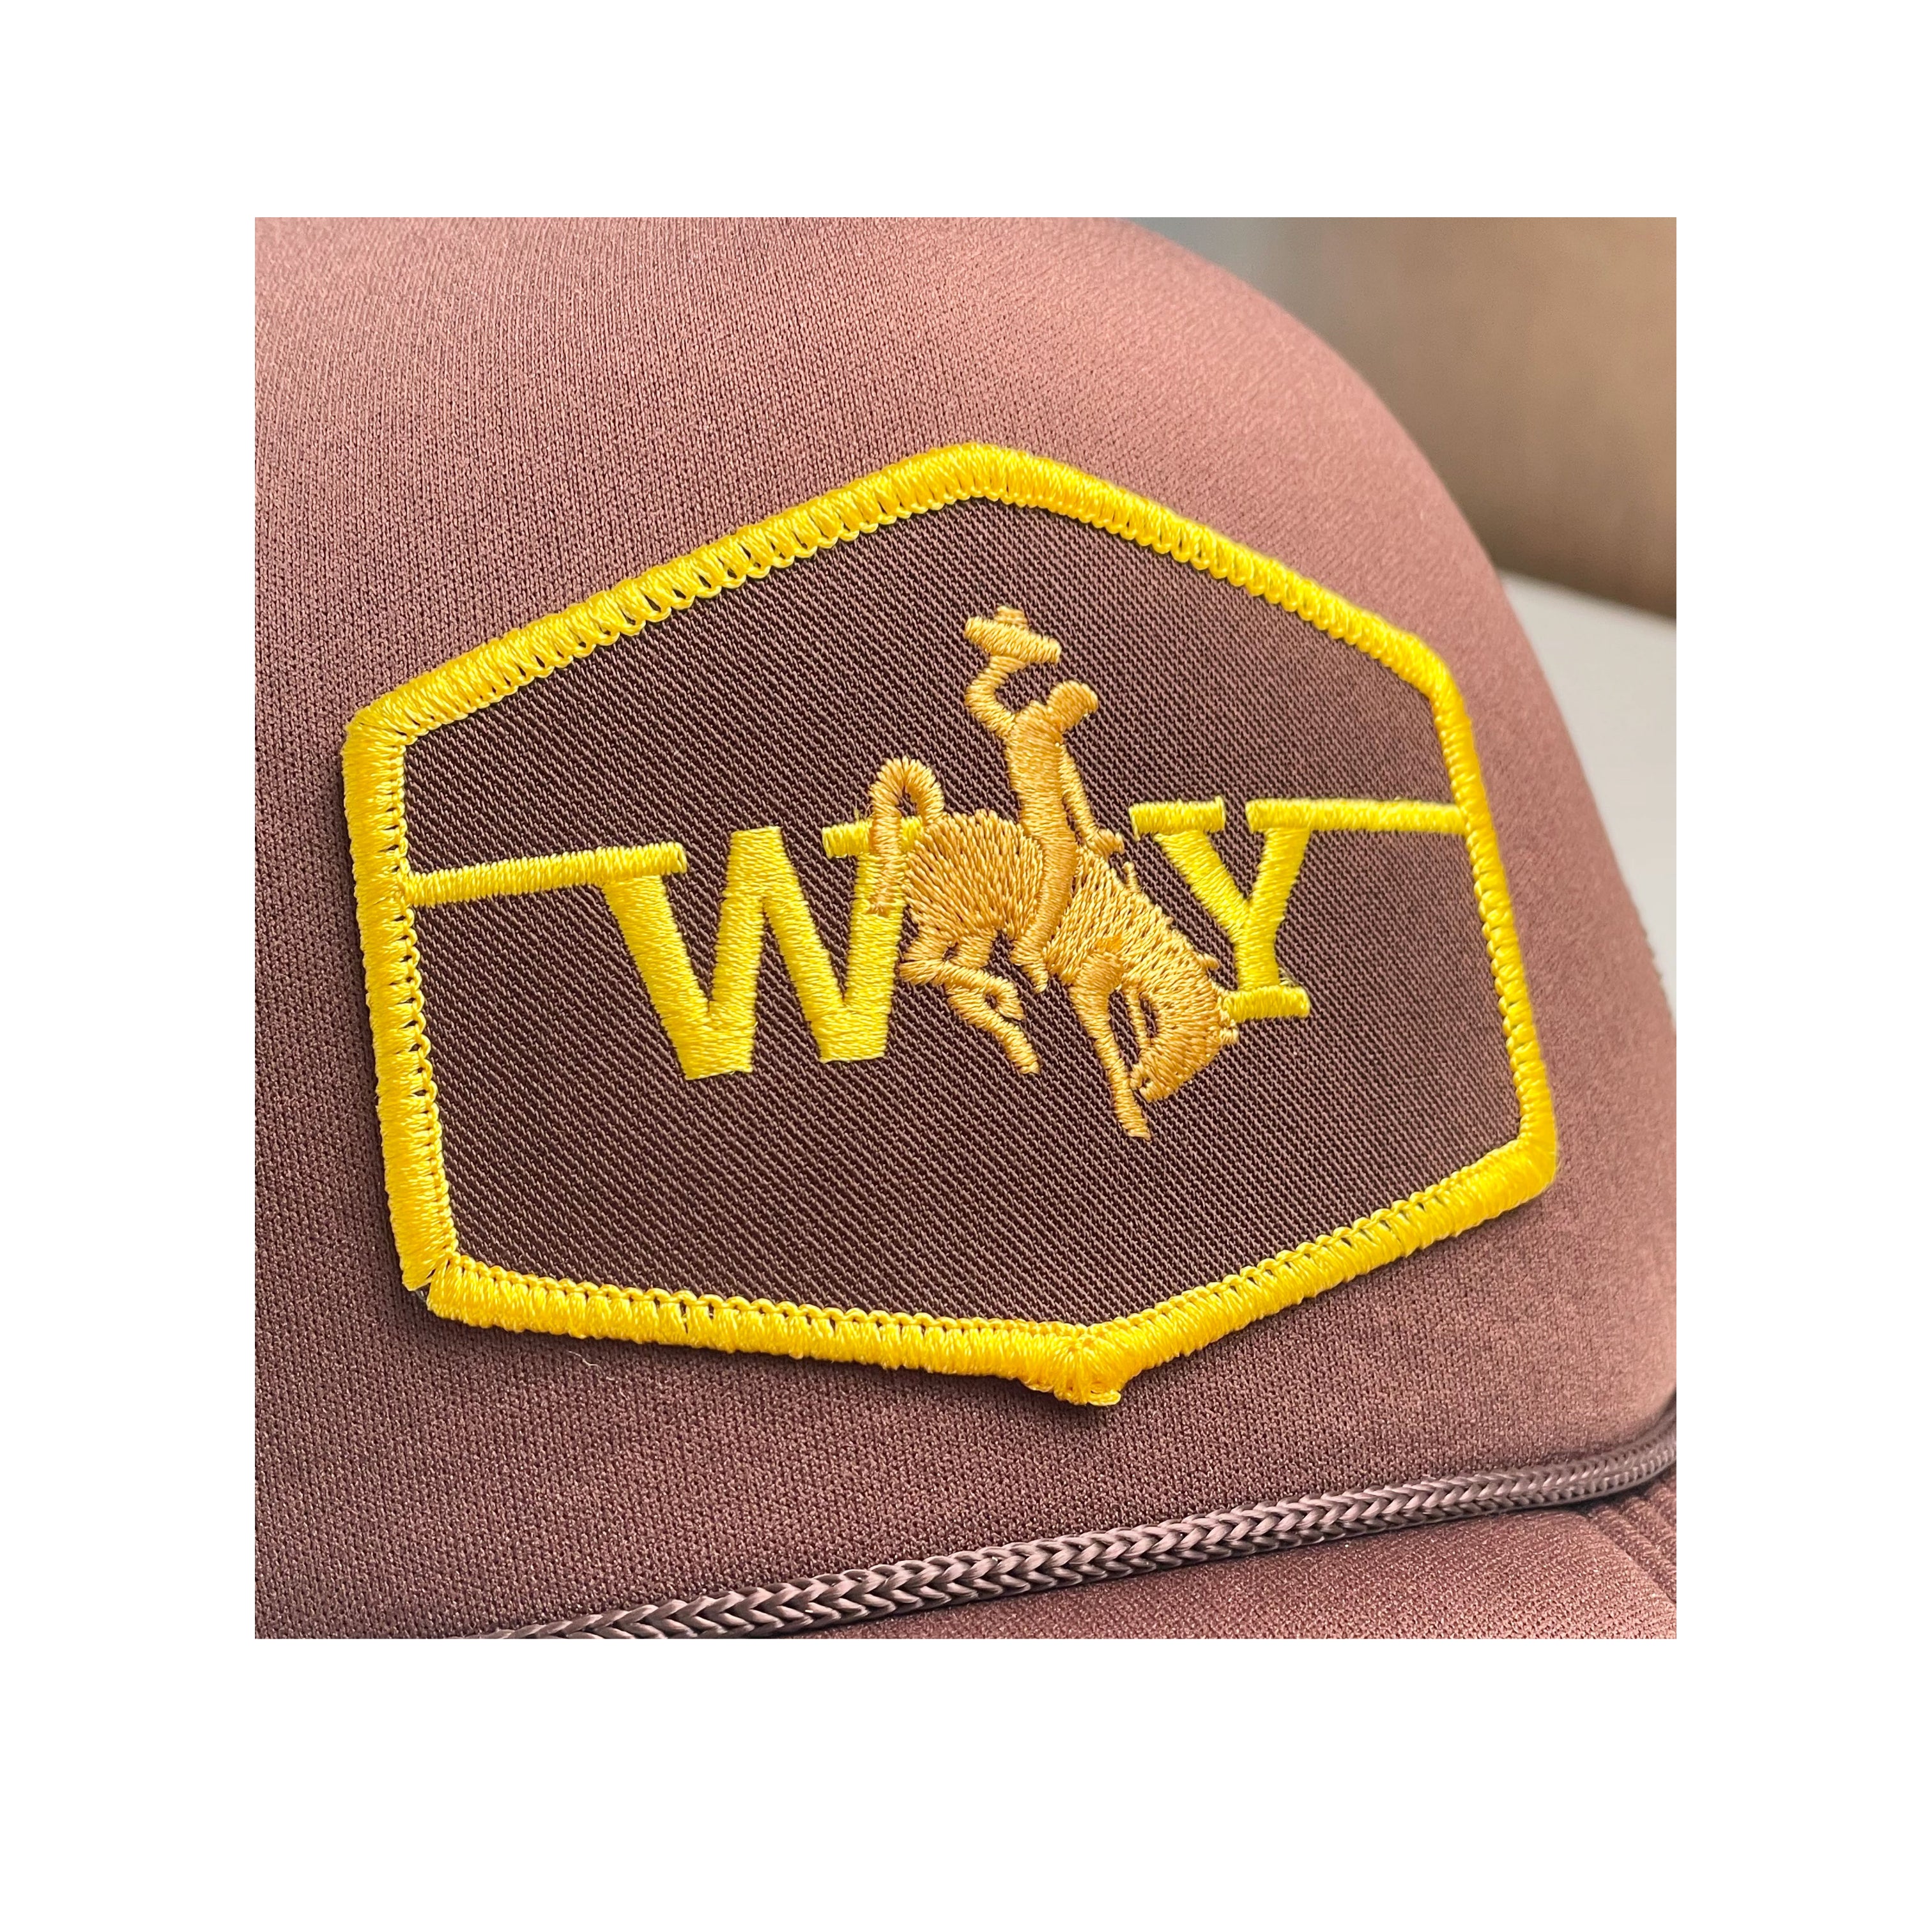 Brown Wyoming Bronco Patch Trucker Hat